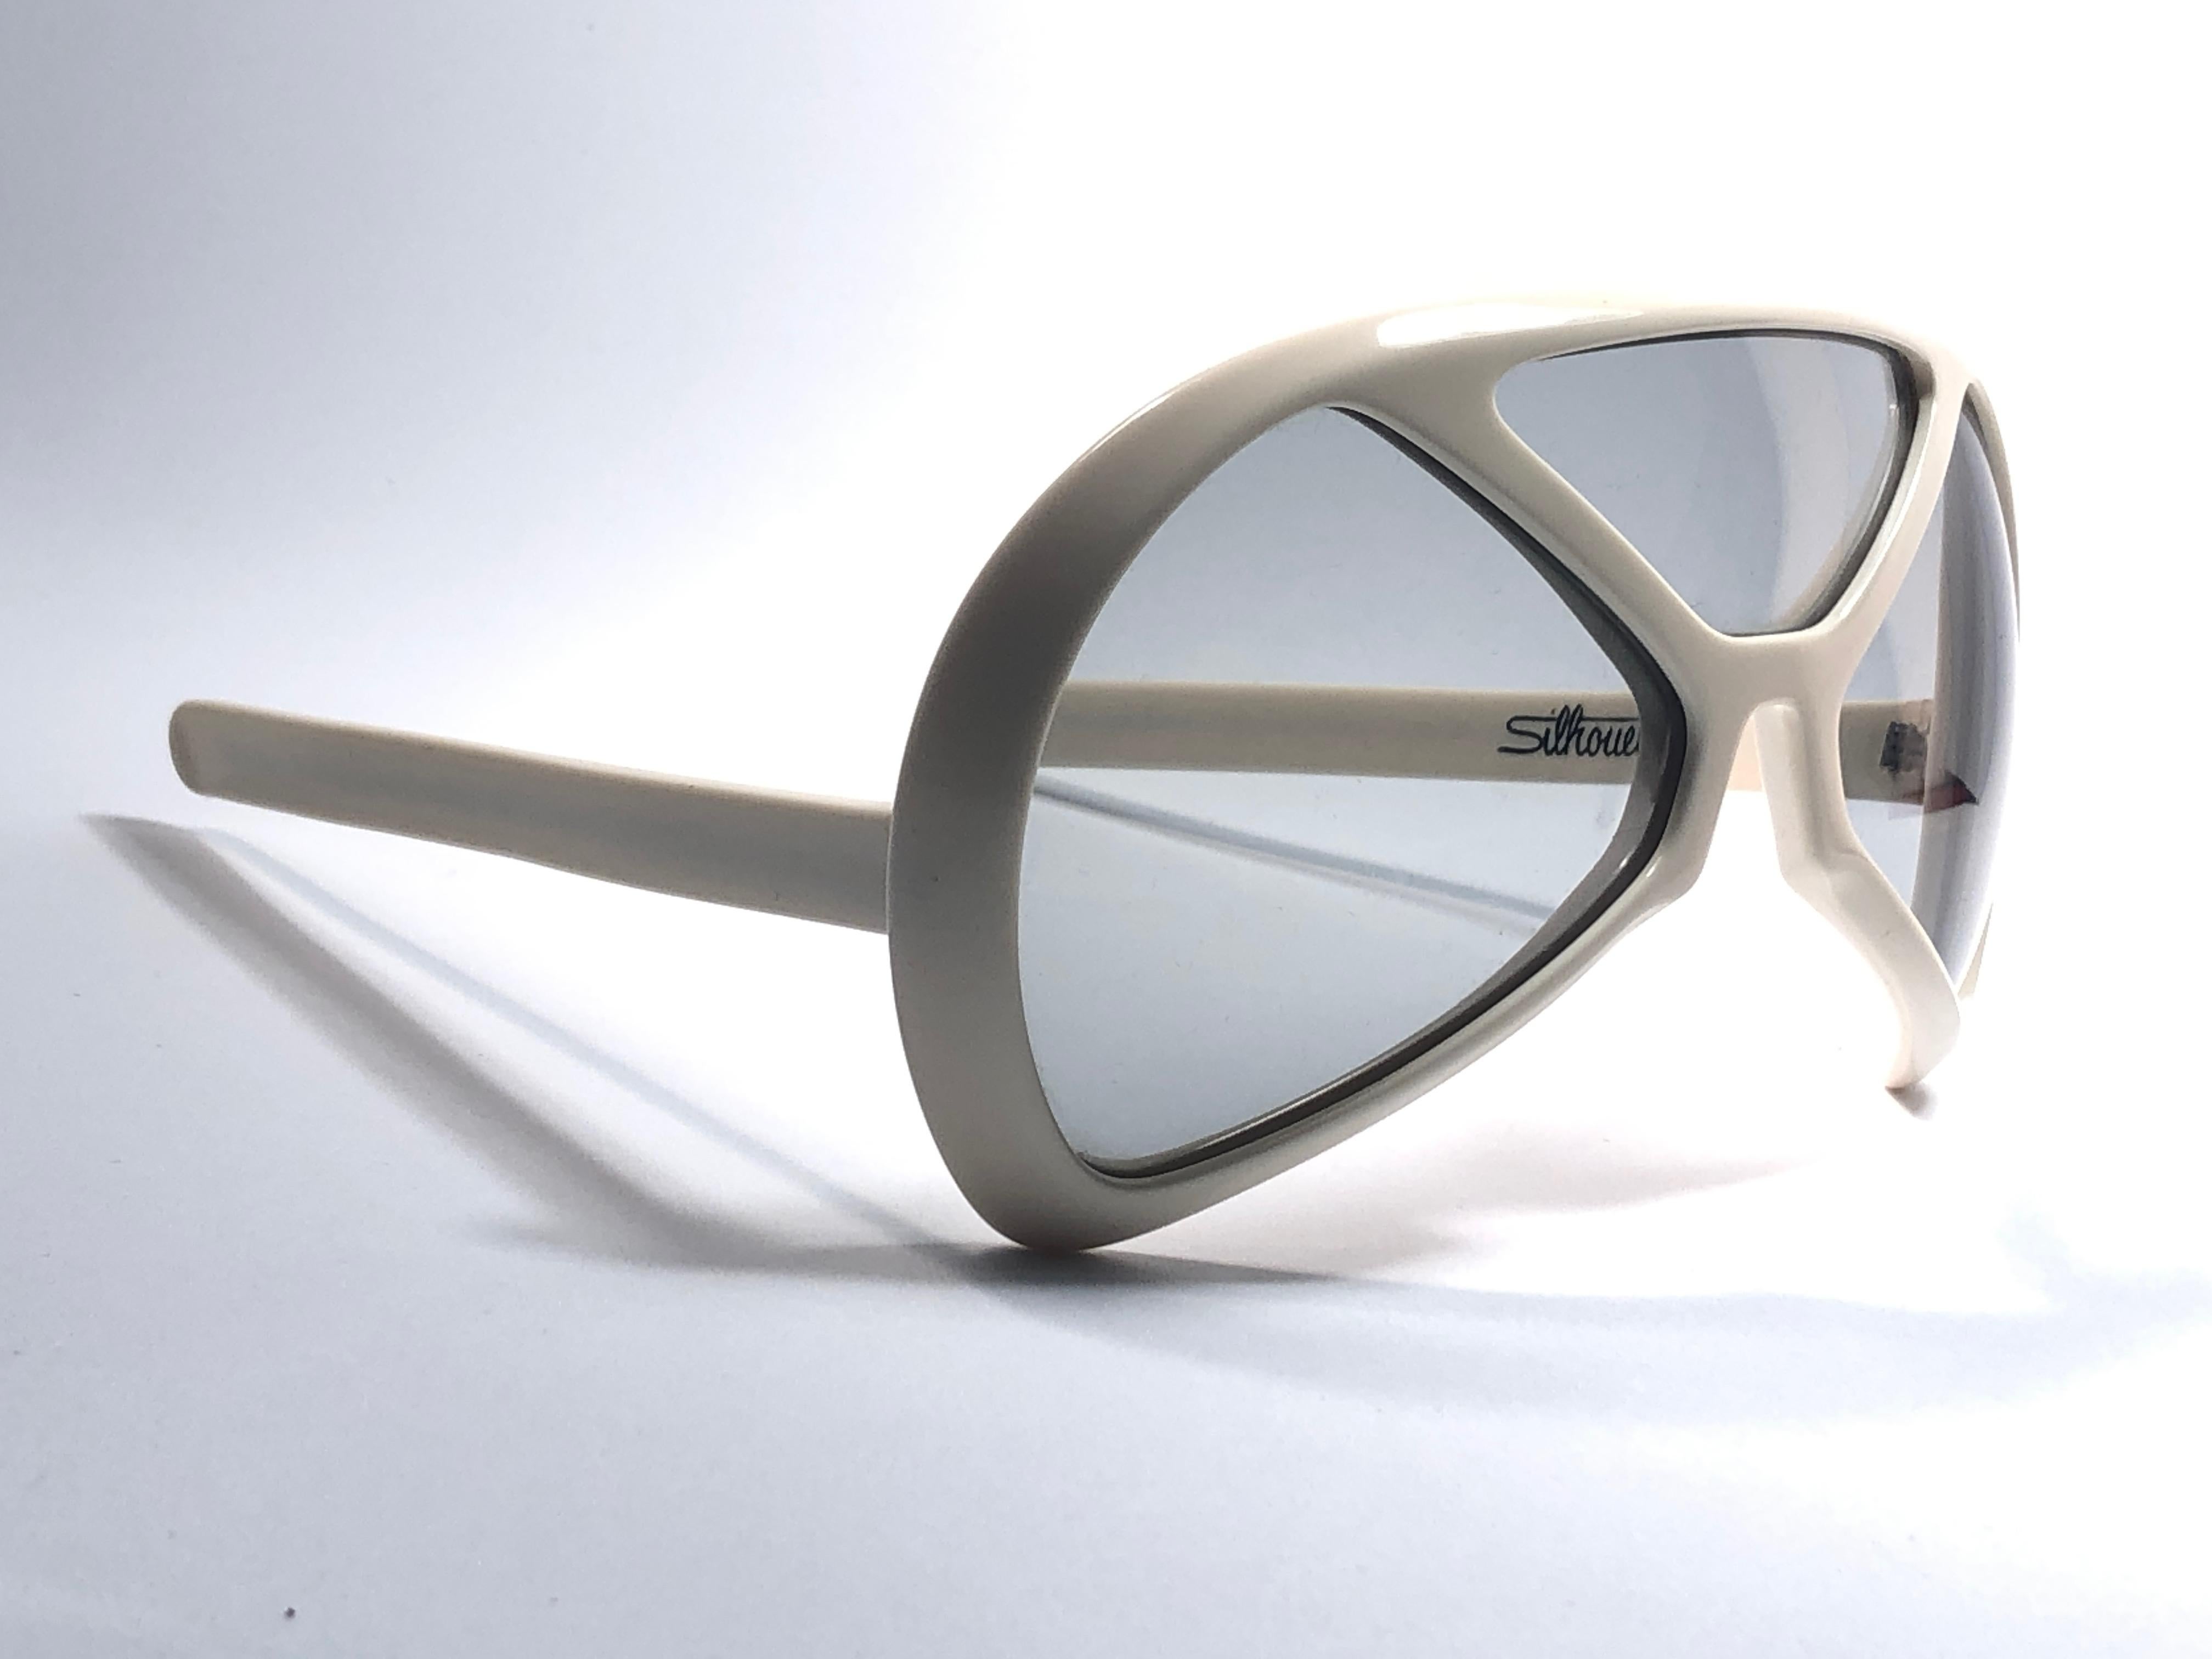 New Vintage Collector Item Silhouette Futura 570 in white.

Designed by Dora Demmel in 1973, this rare piece is the epitome of avant garde & futuristic eye wear fashion.

Made in Germany in 1970's.

This item have minor sign of wear due to storage.